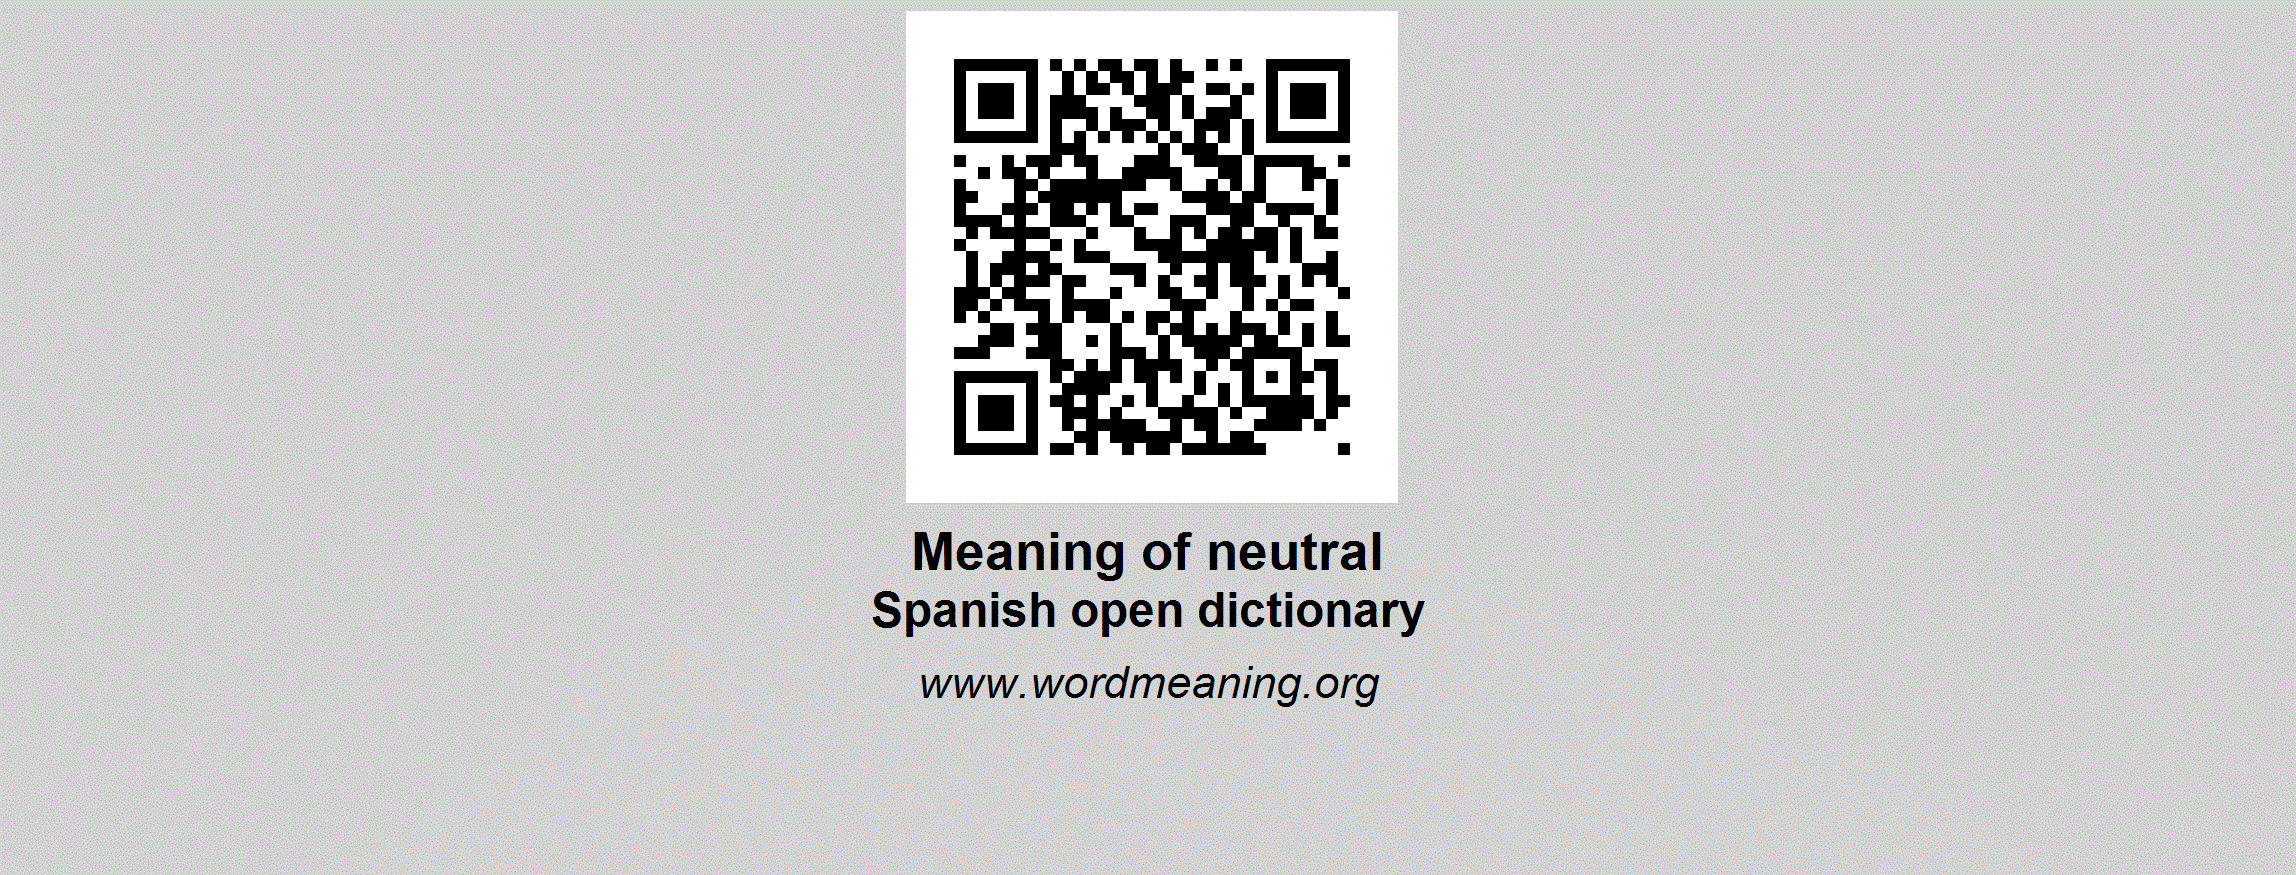 Neutral meaning